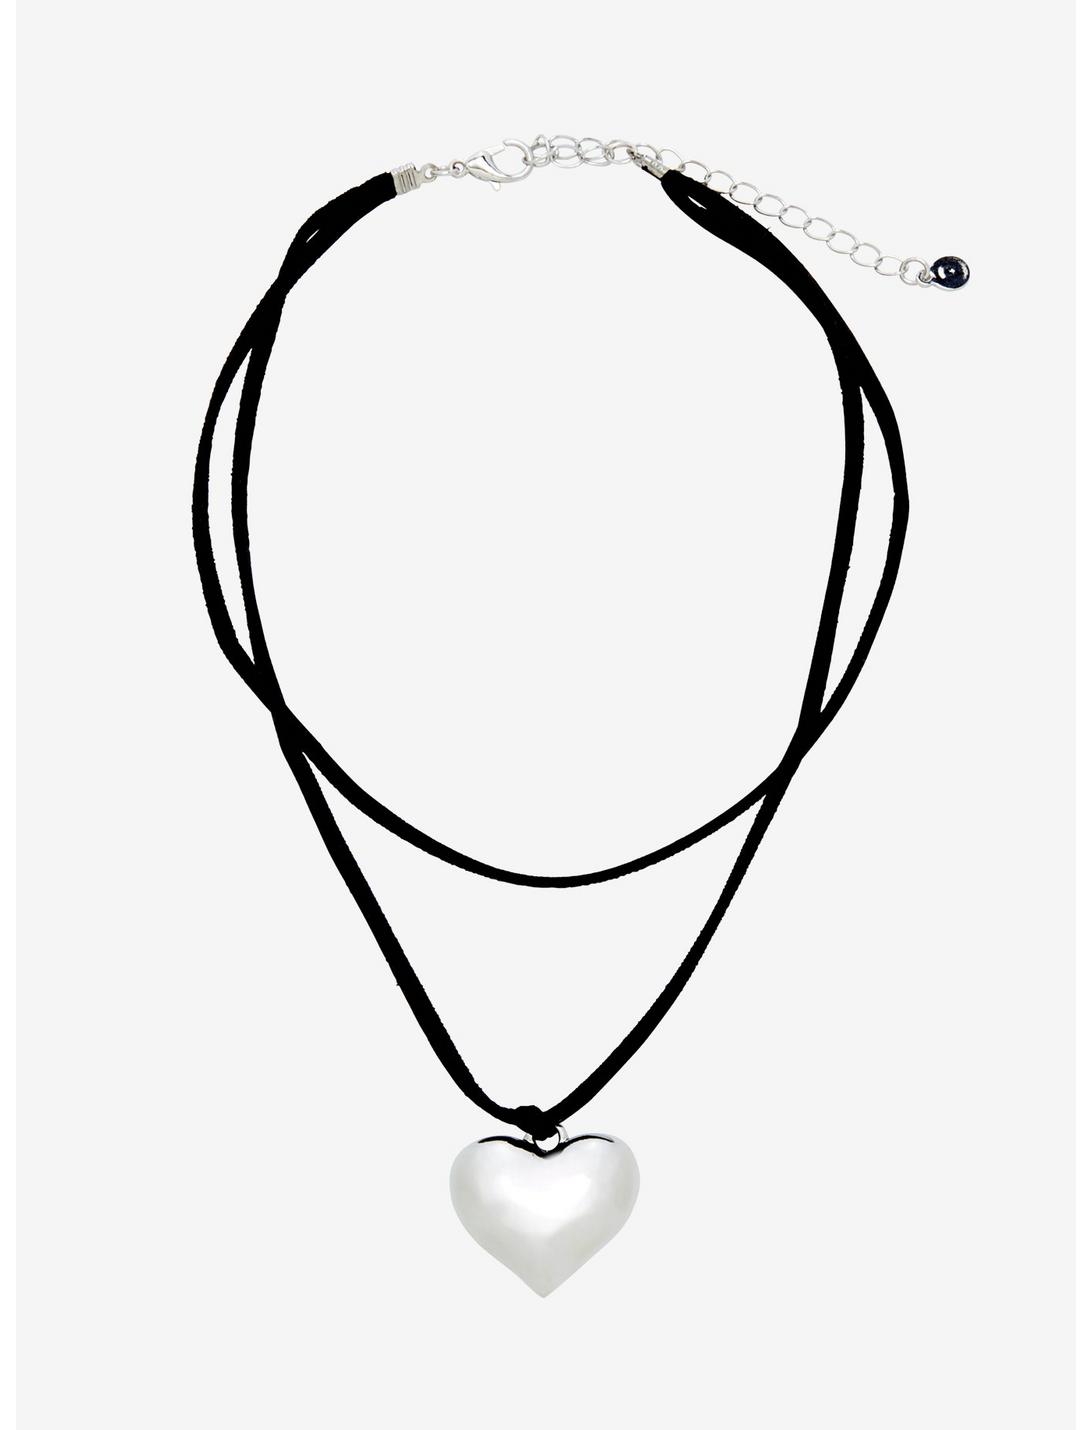 Silver Heart Double Cord Necklace, , hi-res